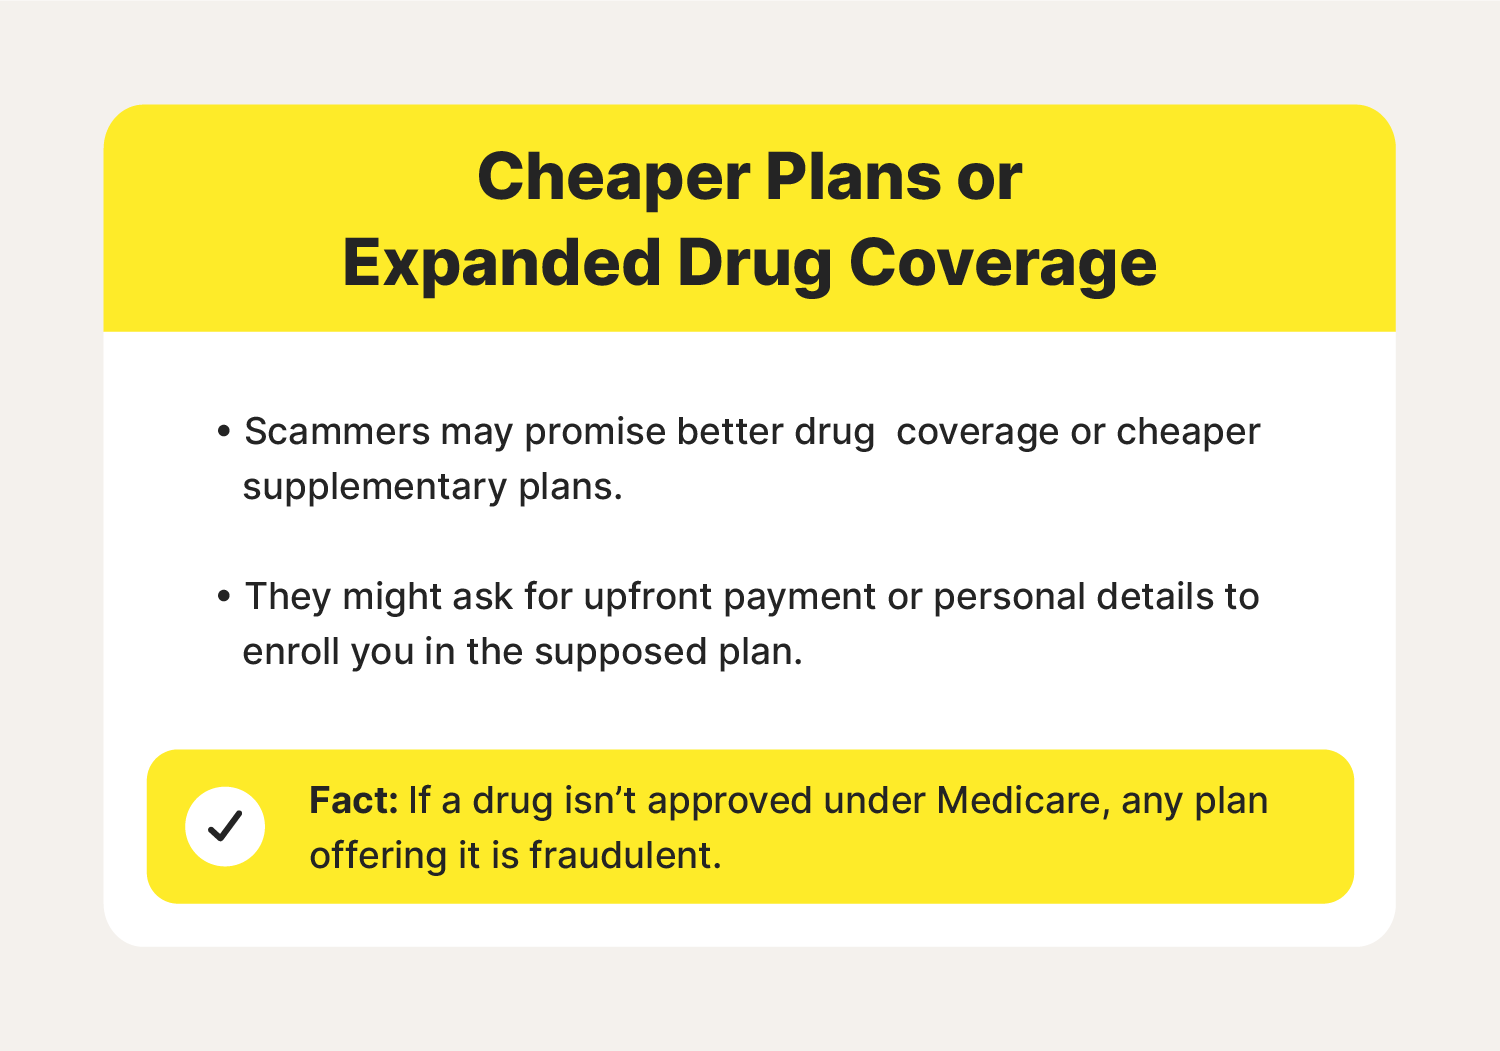 A chart covers one of the most common Medicare scams, offers of less expensive plans or expanded drug coverage.